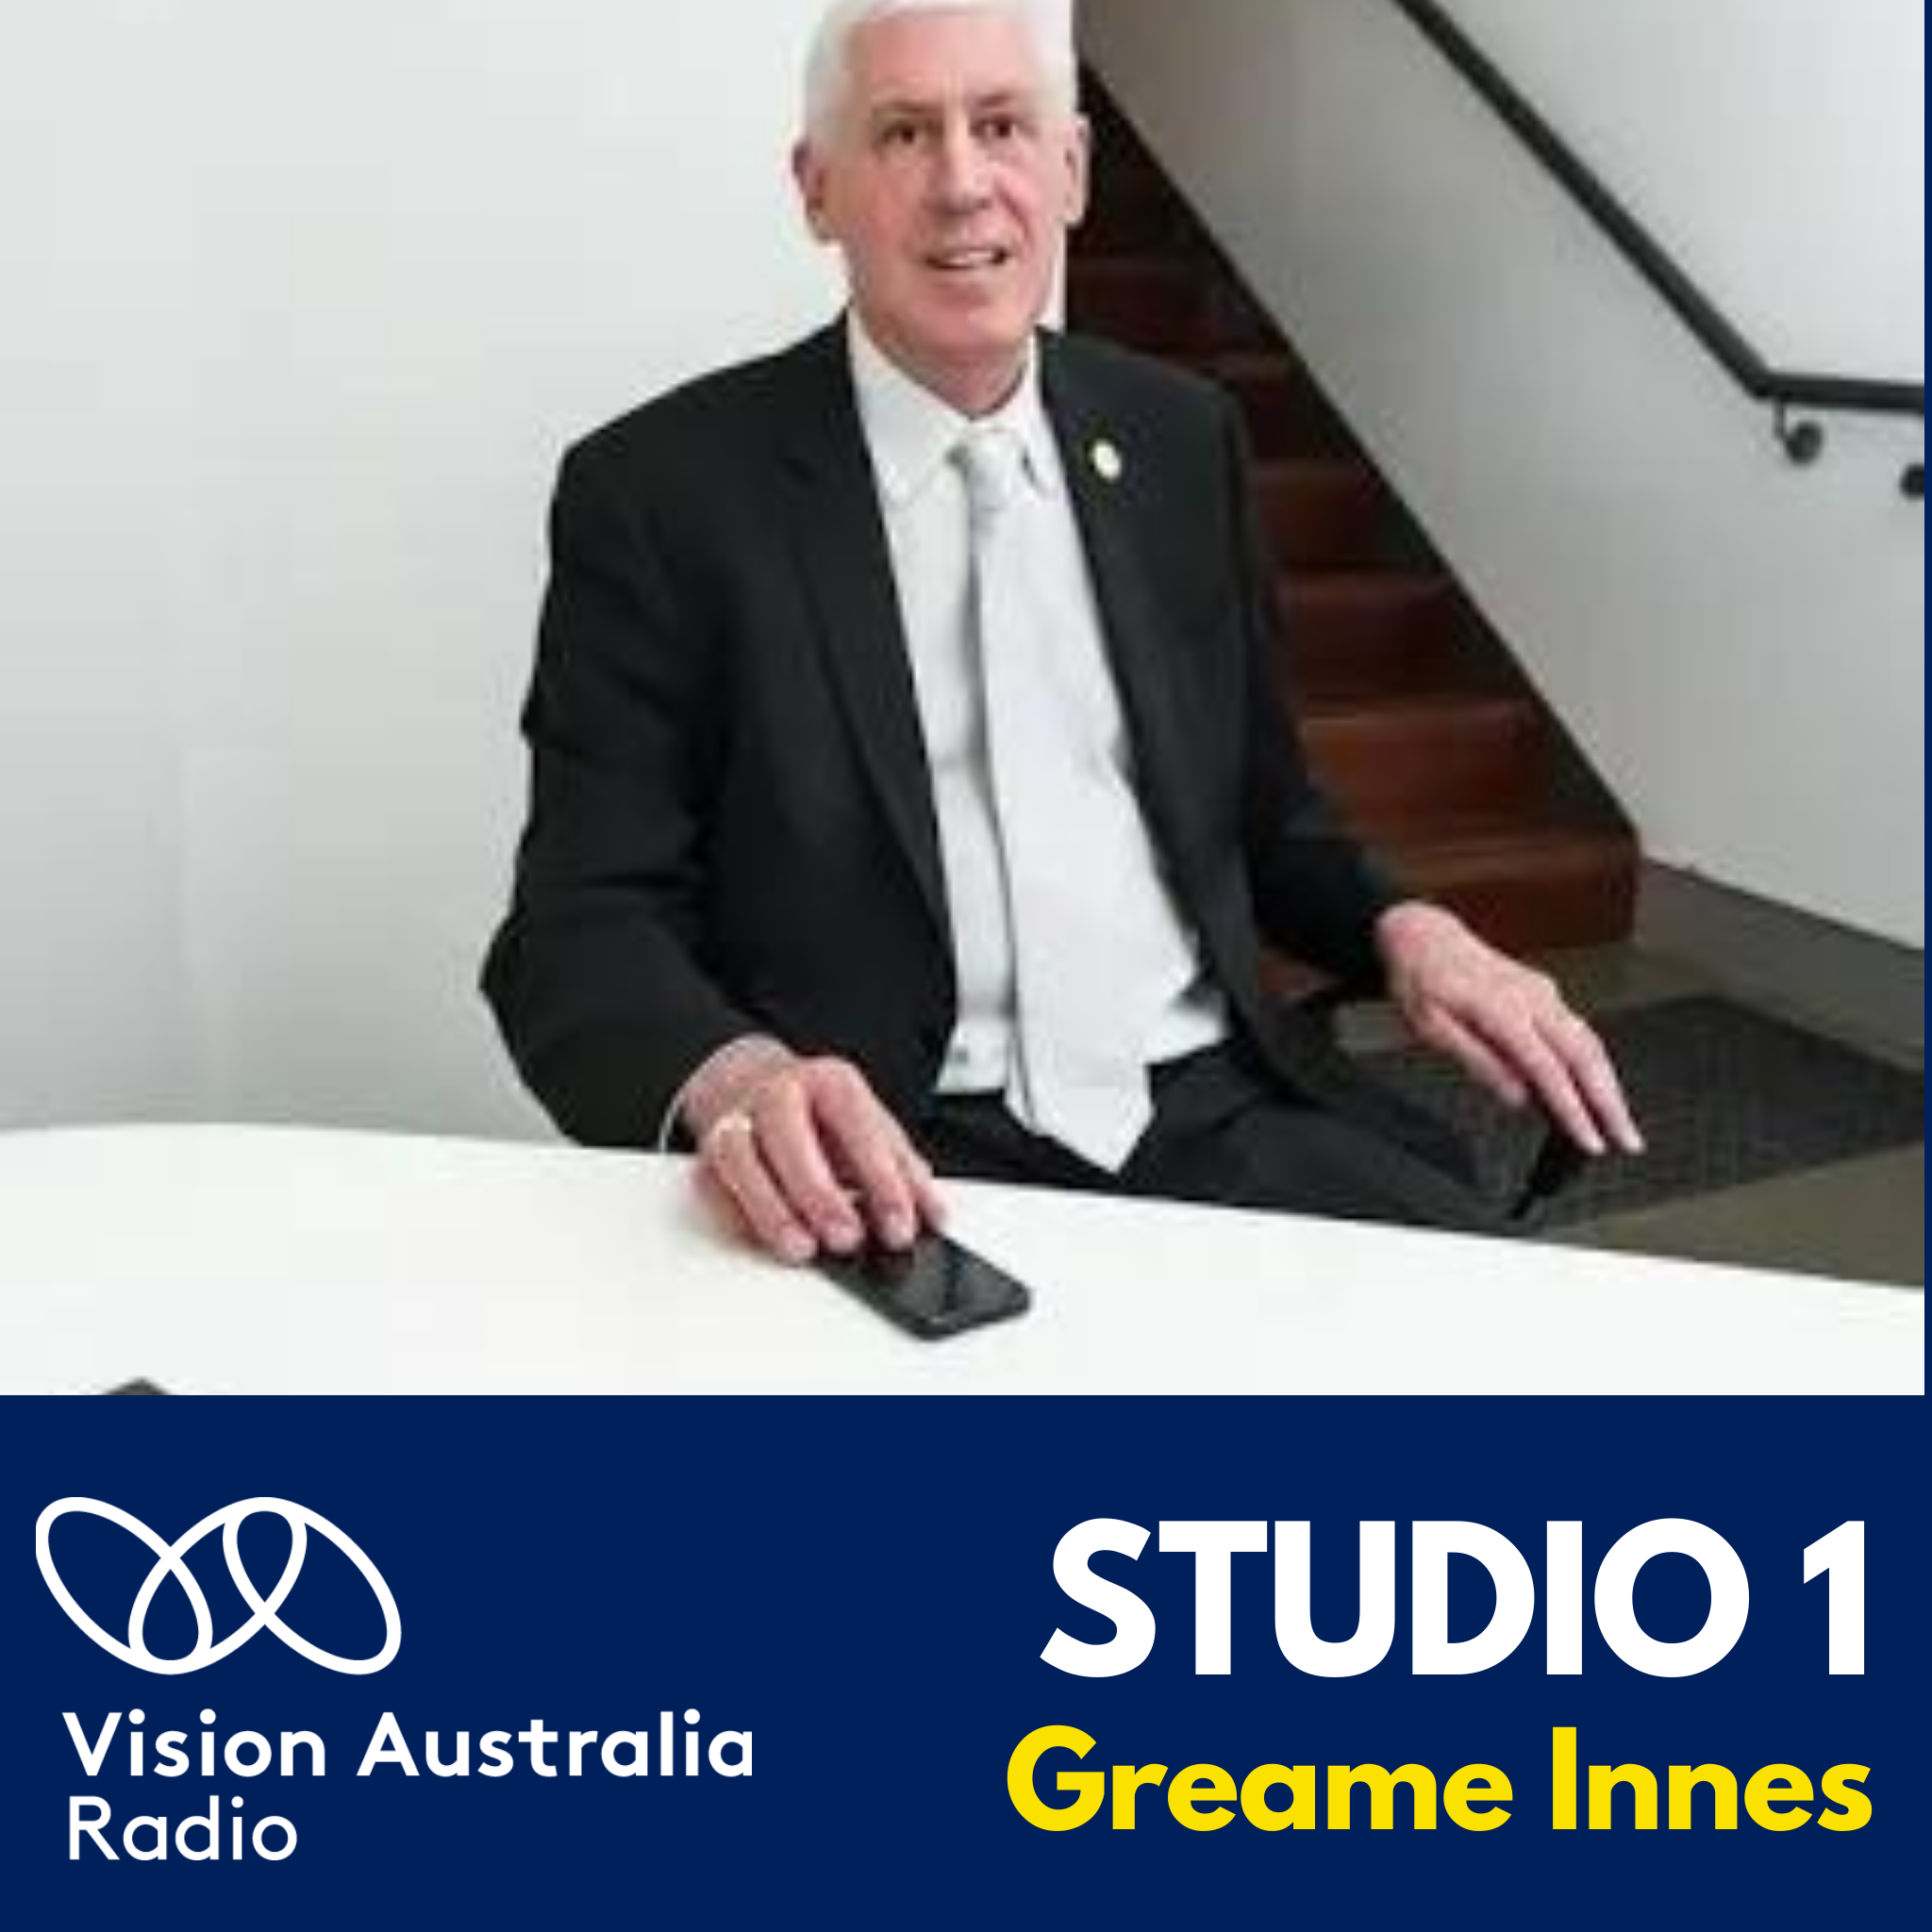 Greame Innes